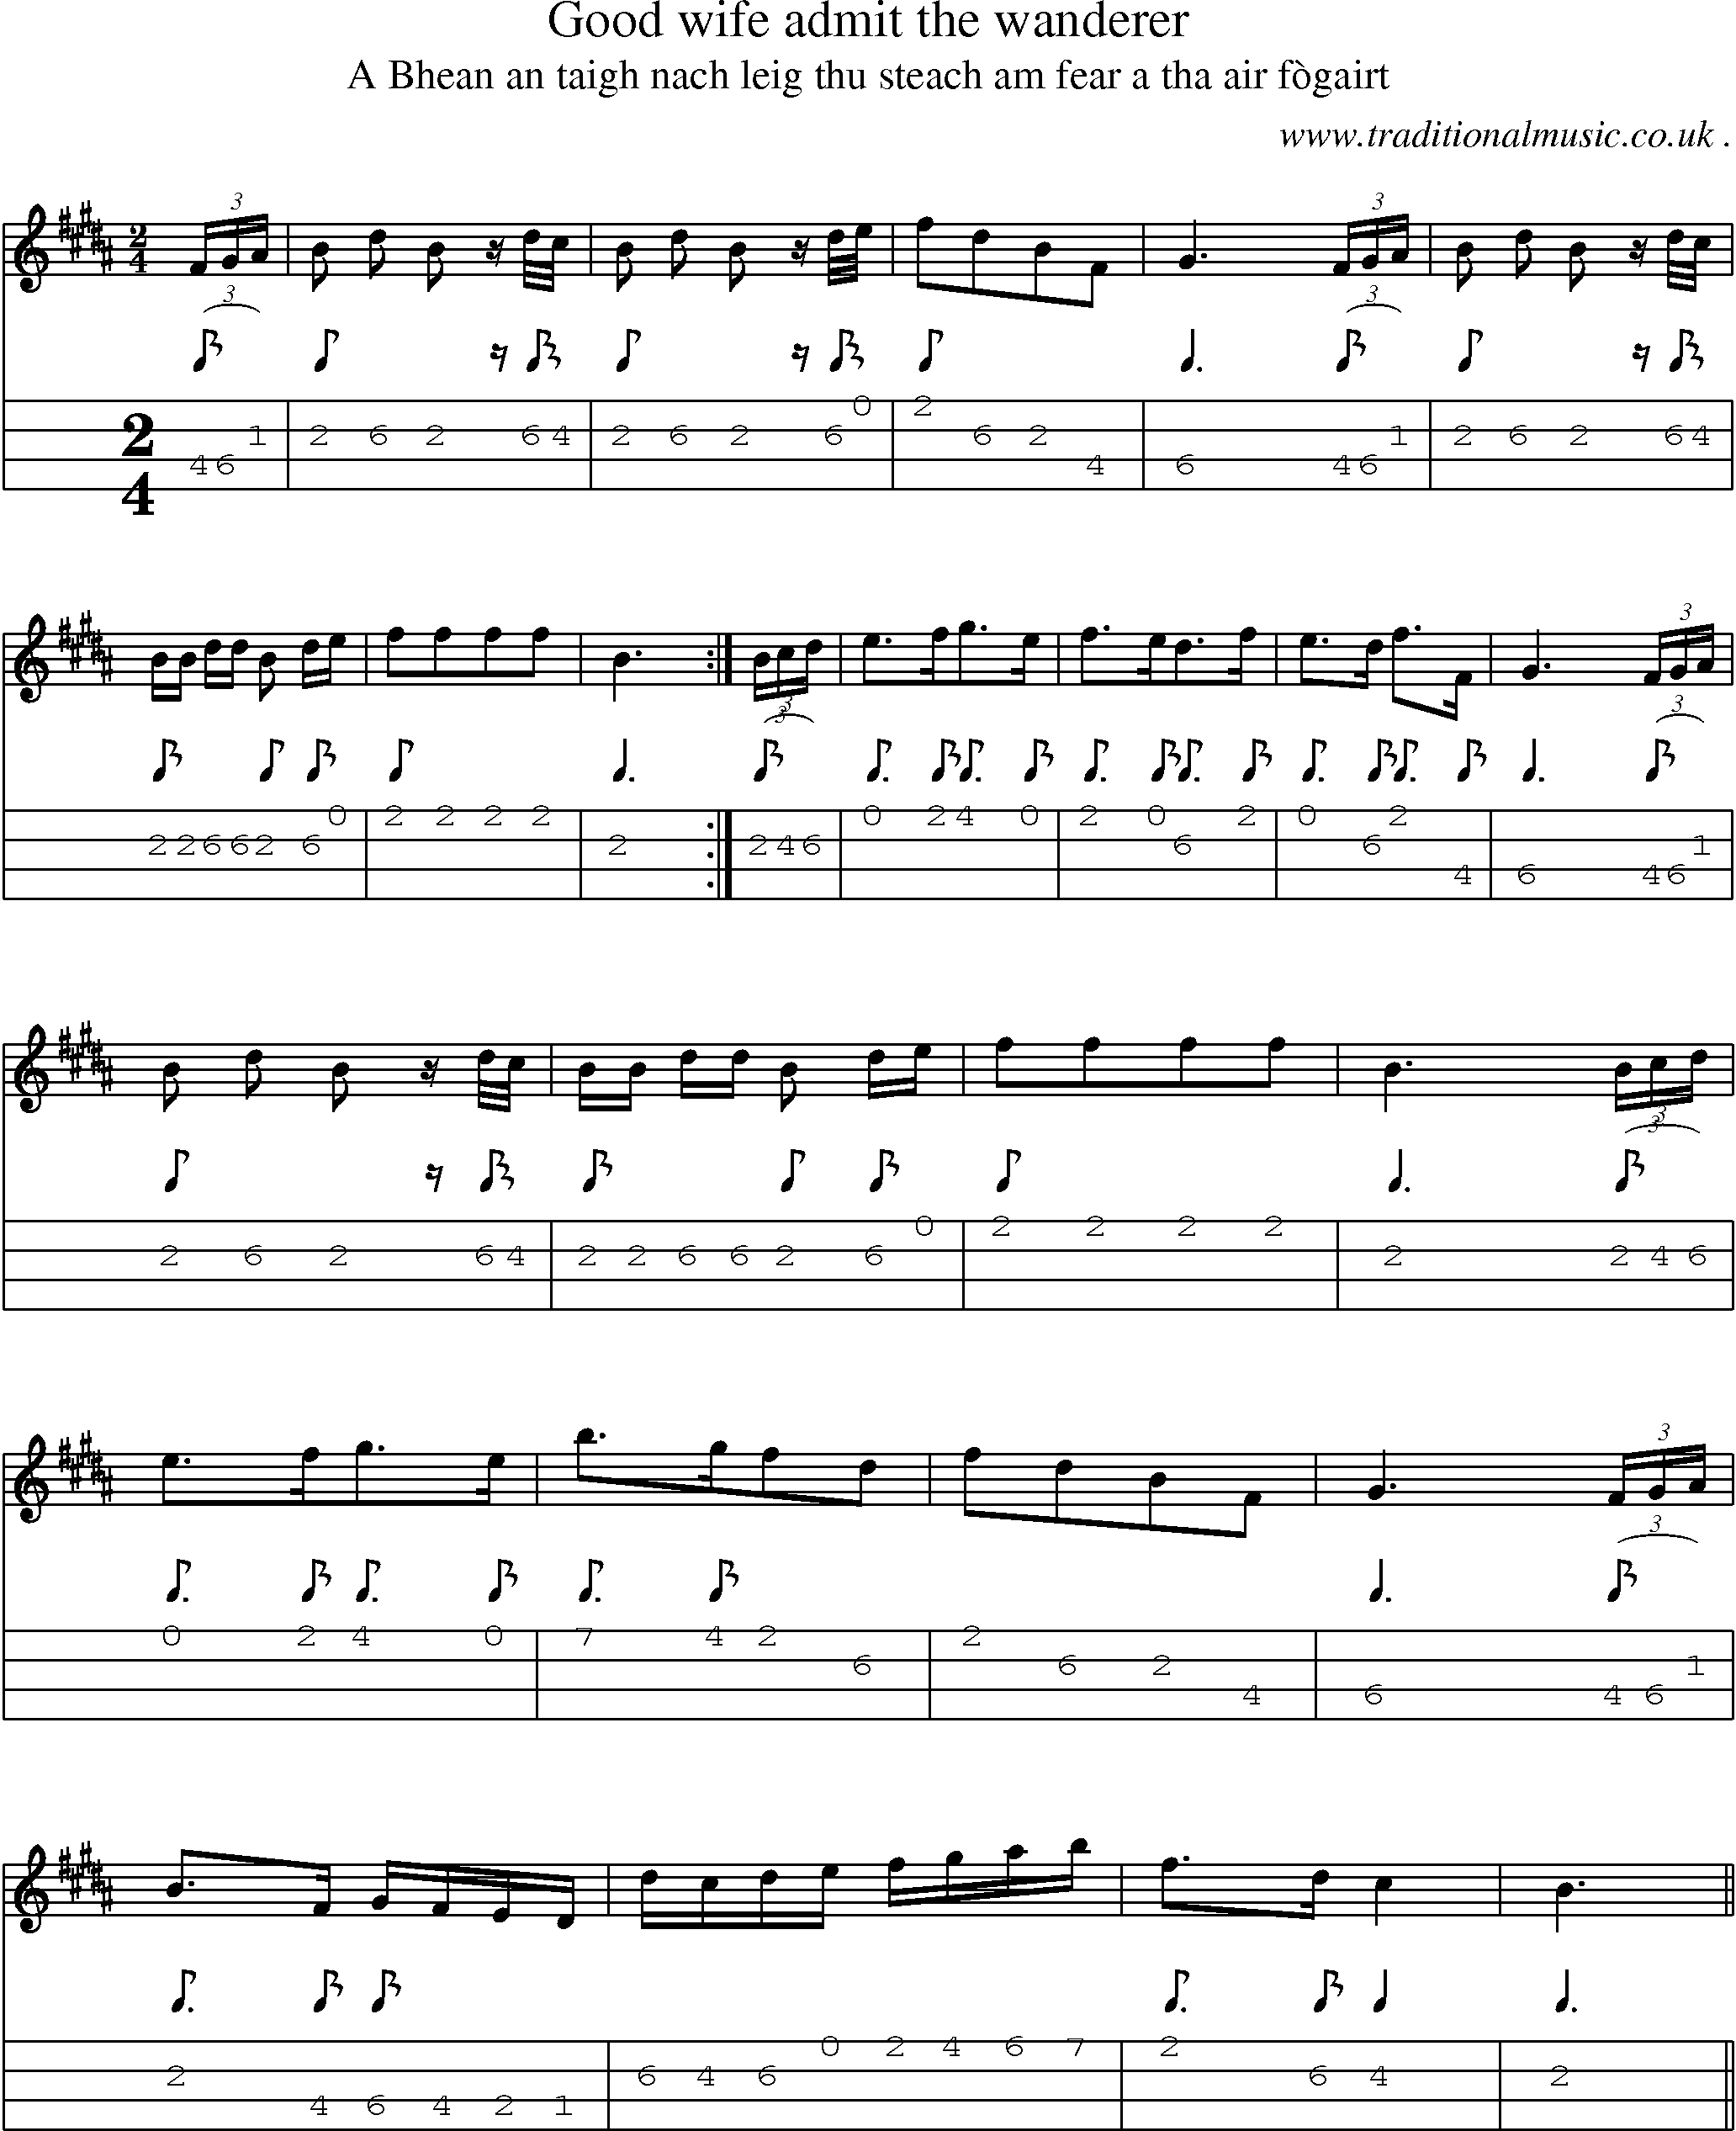 Sheet-music  score, Chords and Mandolin Tabs for Good Wife Admit The Wanderer